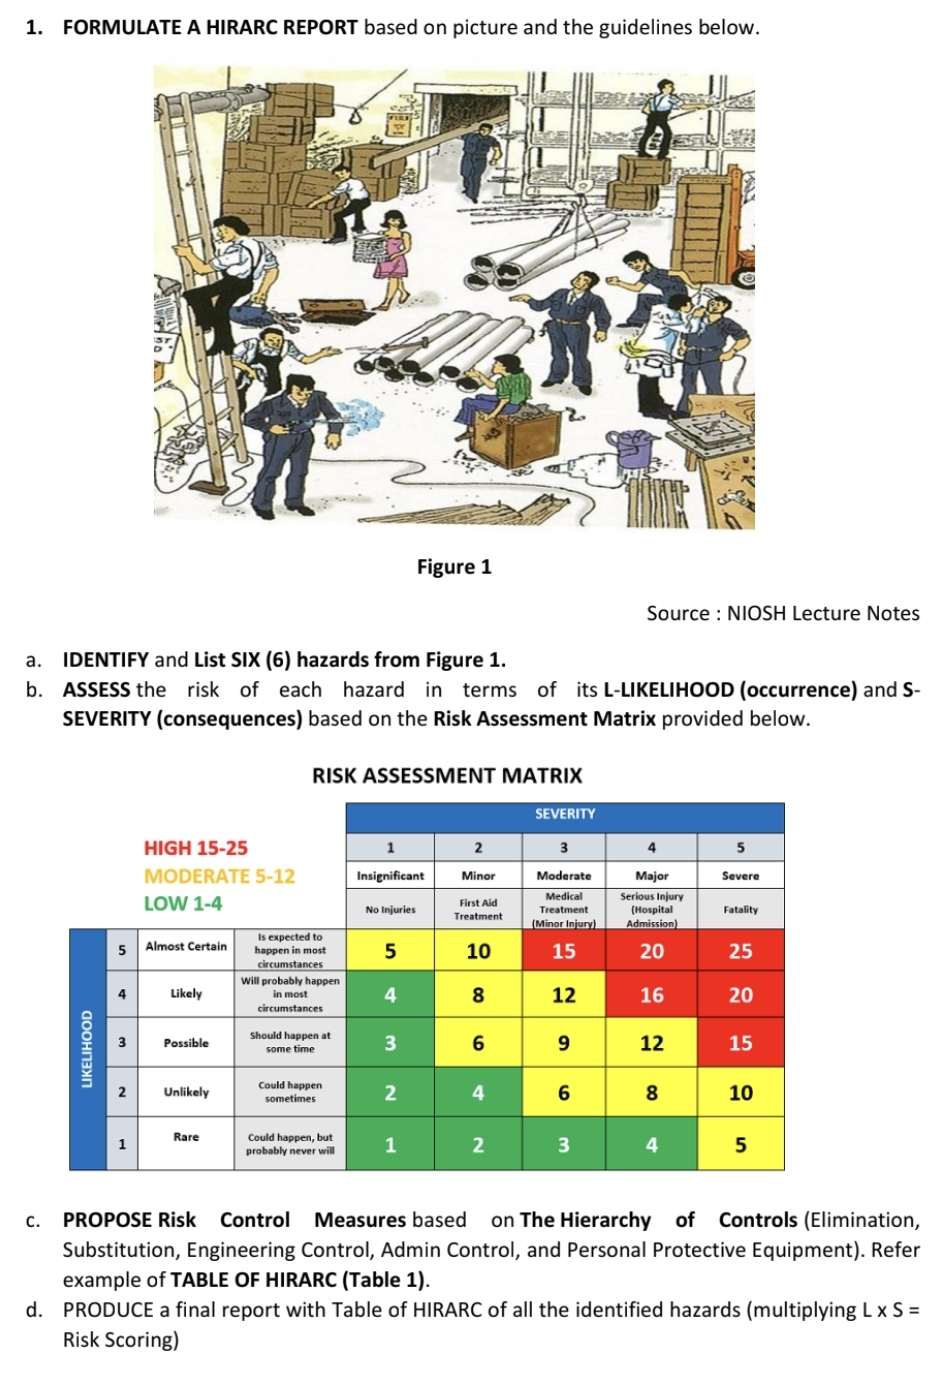 1. FORMULATE A HIRARC REPORT based on picture and the guidelines below.
Figure 1
Source : NIOSH Lecture Notes
IDENTIFY and List SIX (6) hazards from Figure 1.
b. ASSESS the risk of each hazard in terms of its L-LIKELIHOOD (occurrence) and S-
SEVERITY (consequences) based on the Risk Assessment Matrix provided below.
а.
RISK ASSESSMENT MATRIX
SEVERITY
HIGH 15-25
1
3
4
5
MODERATE 5-12
Insignificant
Minor
Moderate
Major
Severe
Medical
Treatment
(Minor Injury)
Serious Injury
(Hospital
Admission)
LOW 1-4
First Aid
No Injuries
Fatality
Treatment
Is expected to
happen in most
circumstances
5
Almost Certain
5
10
15
20
25
will probably happen
in most
8
12
20
4
Likely
16
circumstances
Should happen at
Possible
3
6
12
15
some time
Could happen
sometimes
8
10
2
Unlikely
Rare
Could happen, but
probably never will
3
4
PROPOSE Risk
Control
Measures based
on The Hierarchy of
Controls (Elimination,
С.
Substitution, Engineering Control, Admin Control, and Personal Protective Equipment). Refer
example of TABLE OF HIRARC (Table 1).
d. PRODUCE a final report with Table of HIRARC of all the identified hazards (multiplying L x S =
Risk Scoring)
